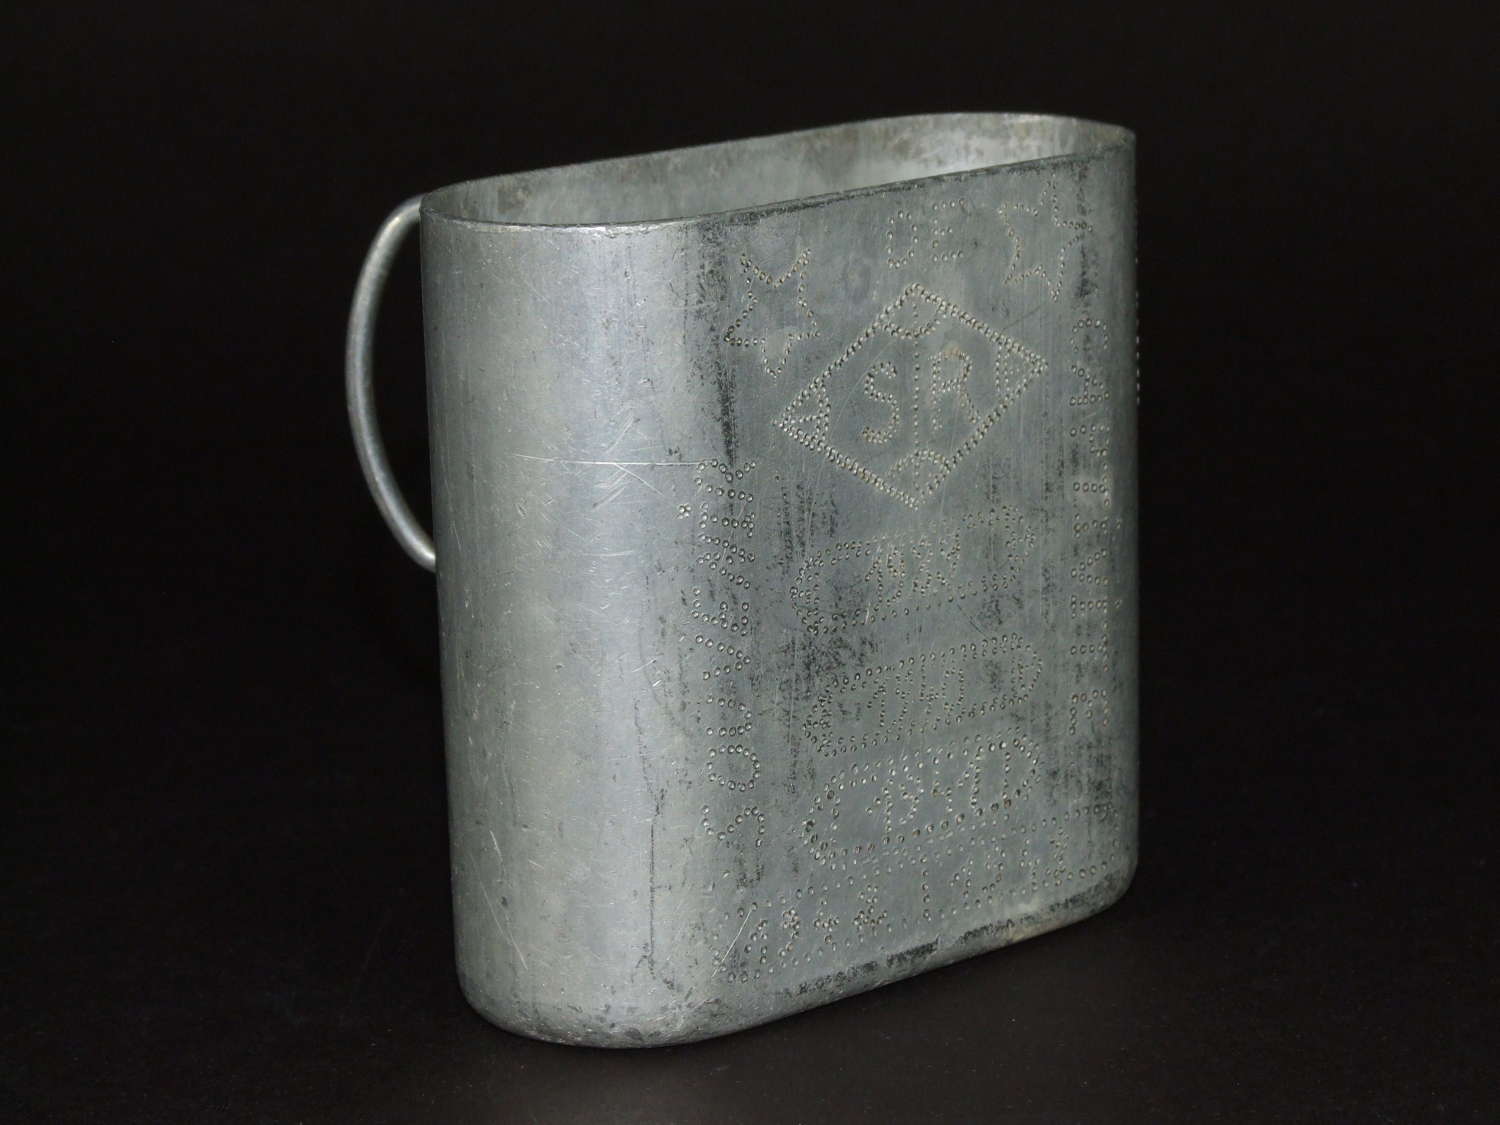 WW11 French POW Souvenired Drinking Cup - Saar Offensive?